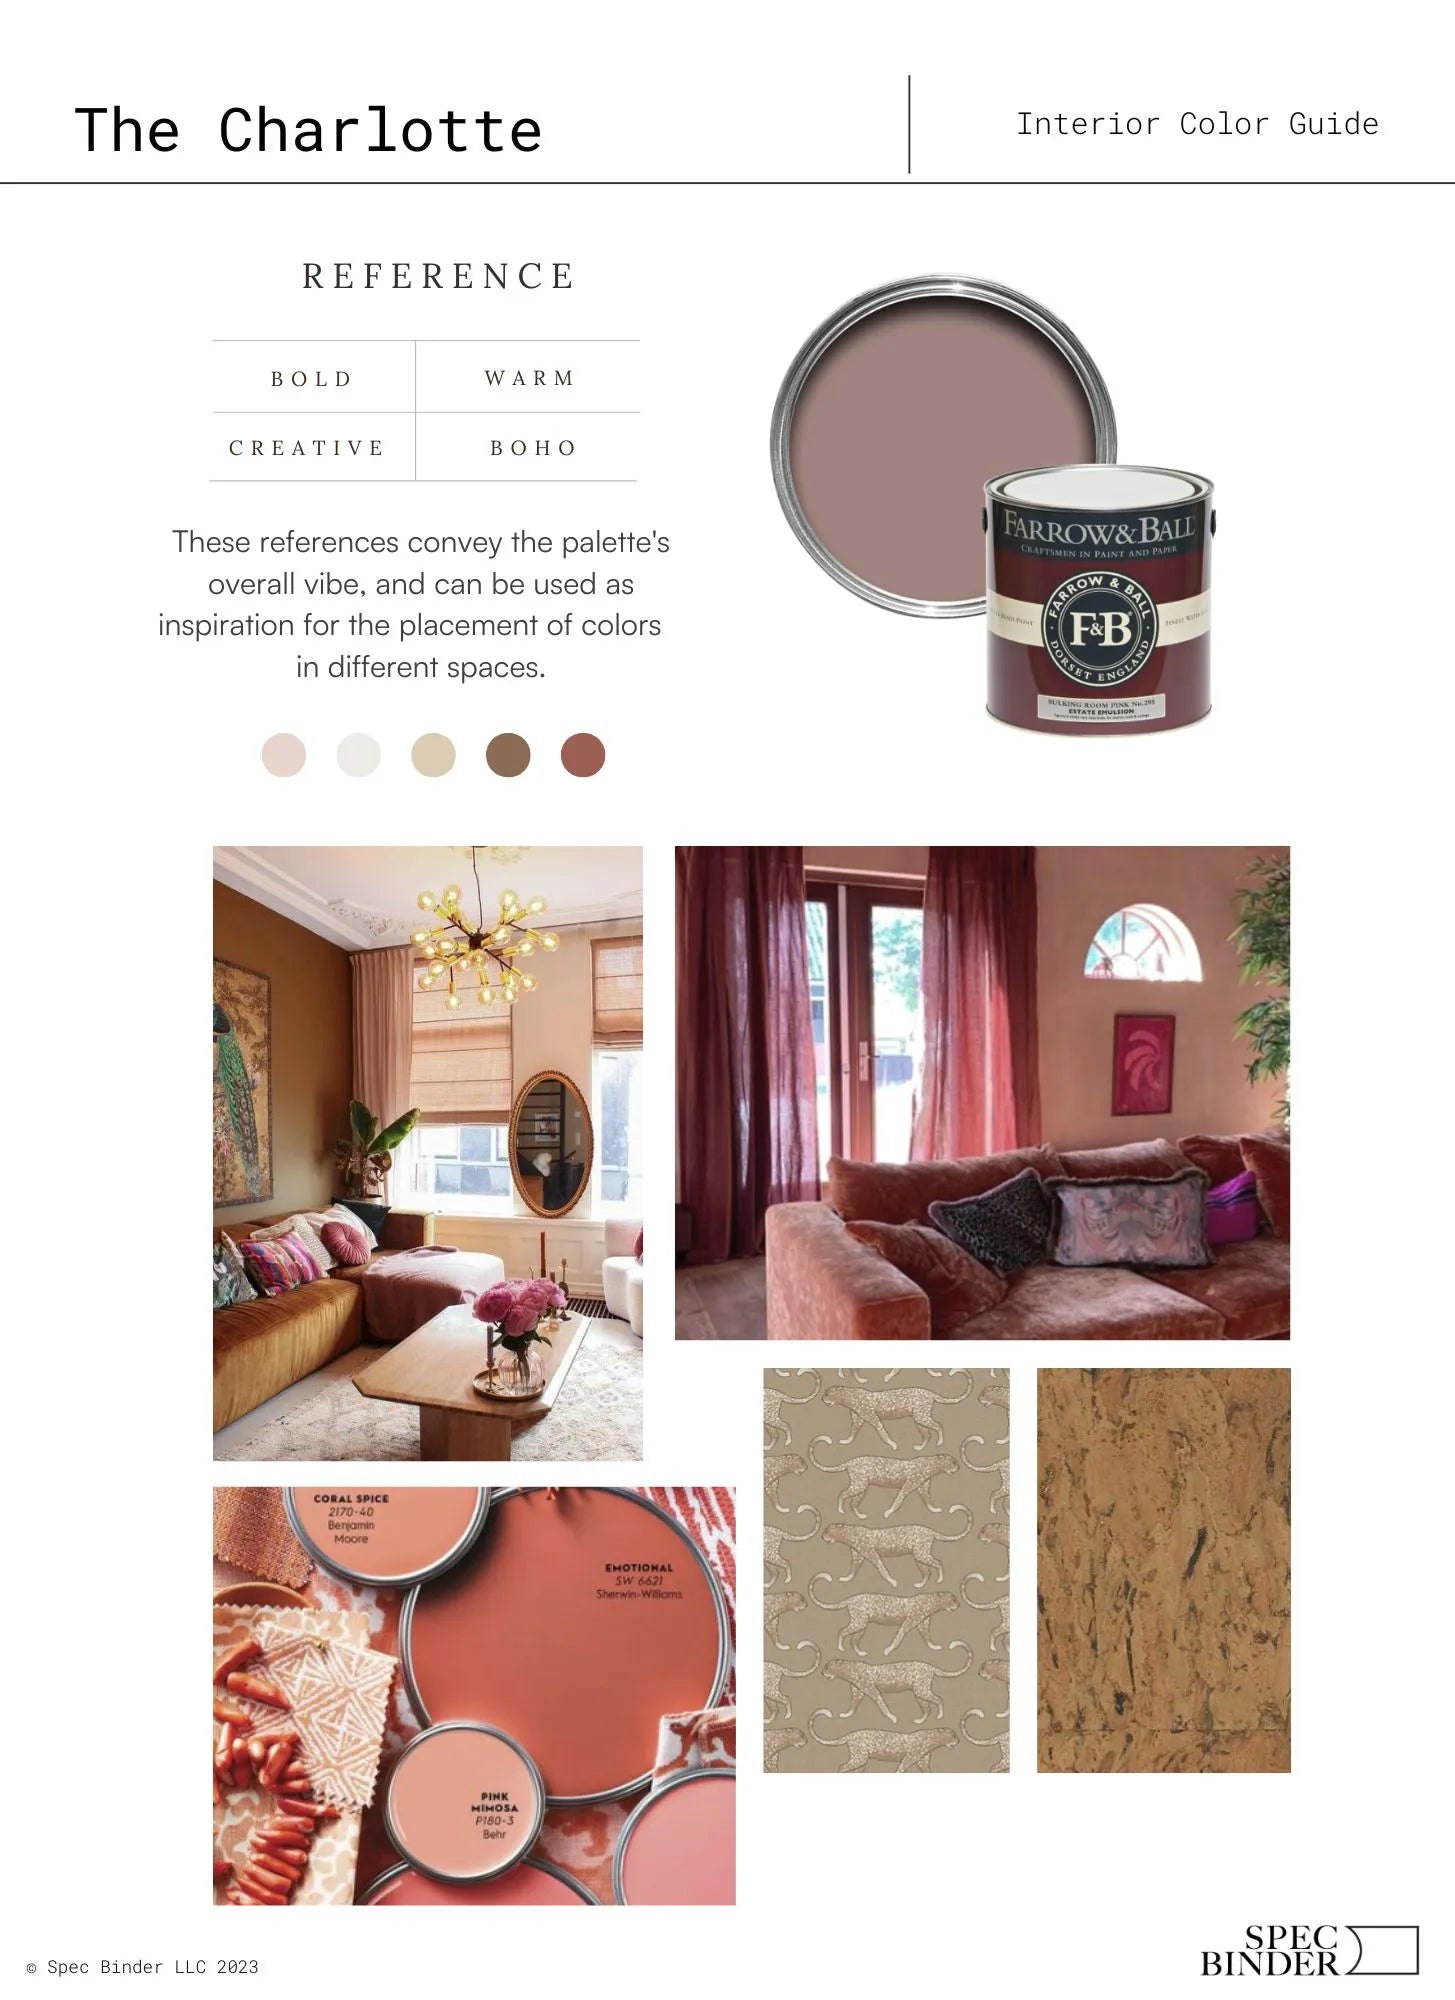 See photos of The Charlotte paint colors in different spaces.The Charlotte Color Palette reference images, paint samples, color swatches, and design elements. The Charlotte interior paint palette is Bold, Warm, Creative, and Boho. The Charlotte 